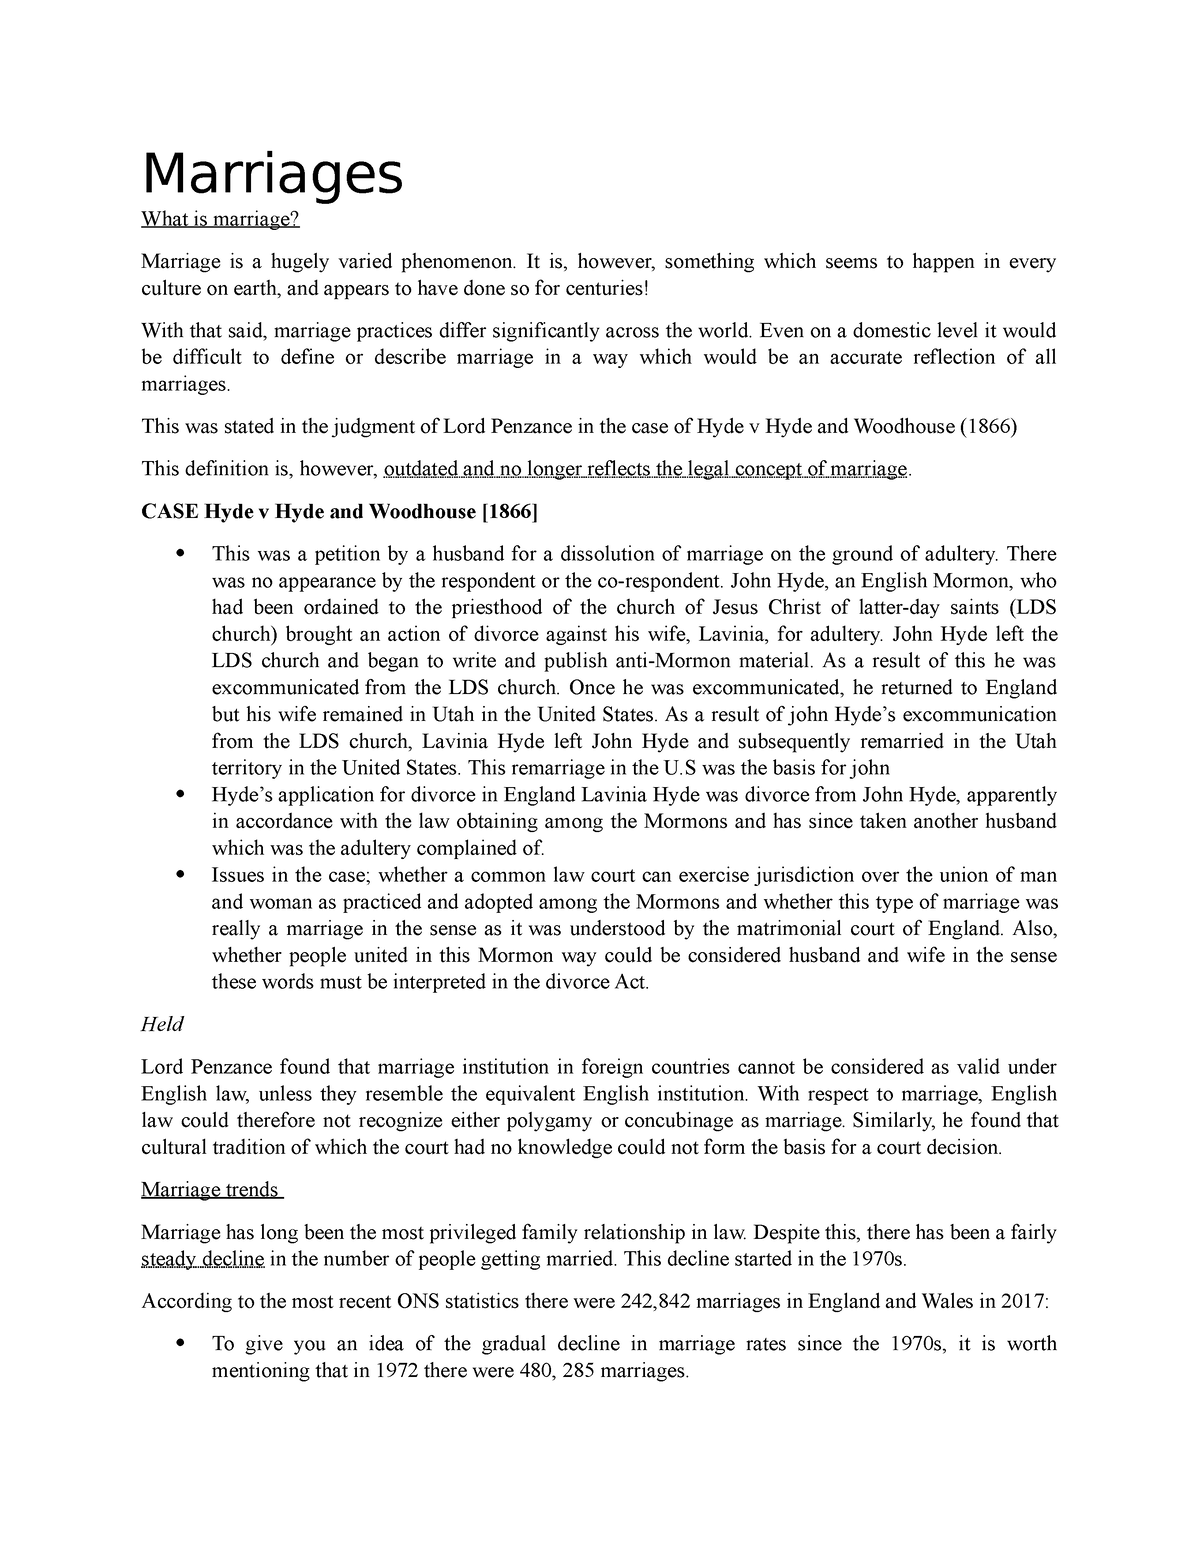 literature review on marriage pdf